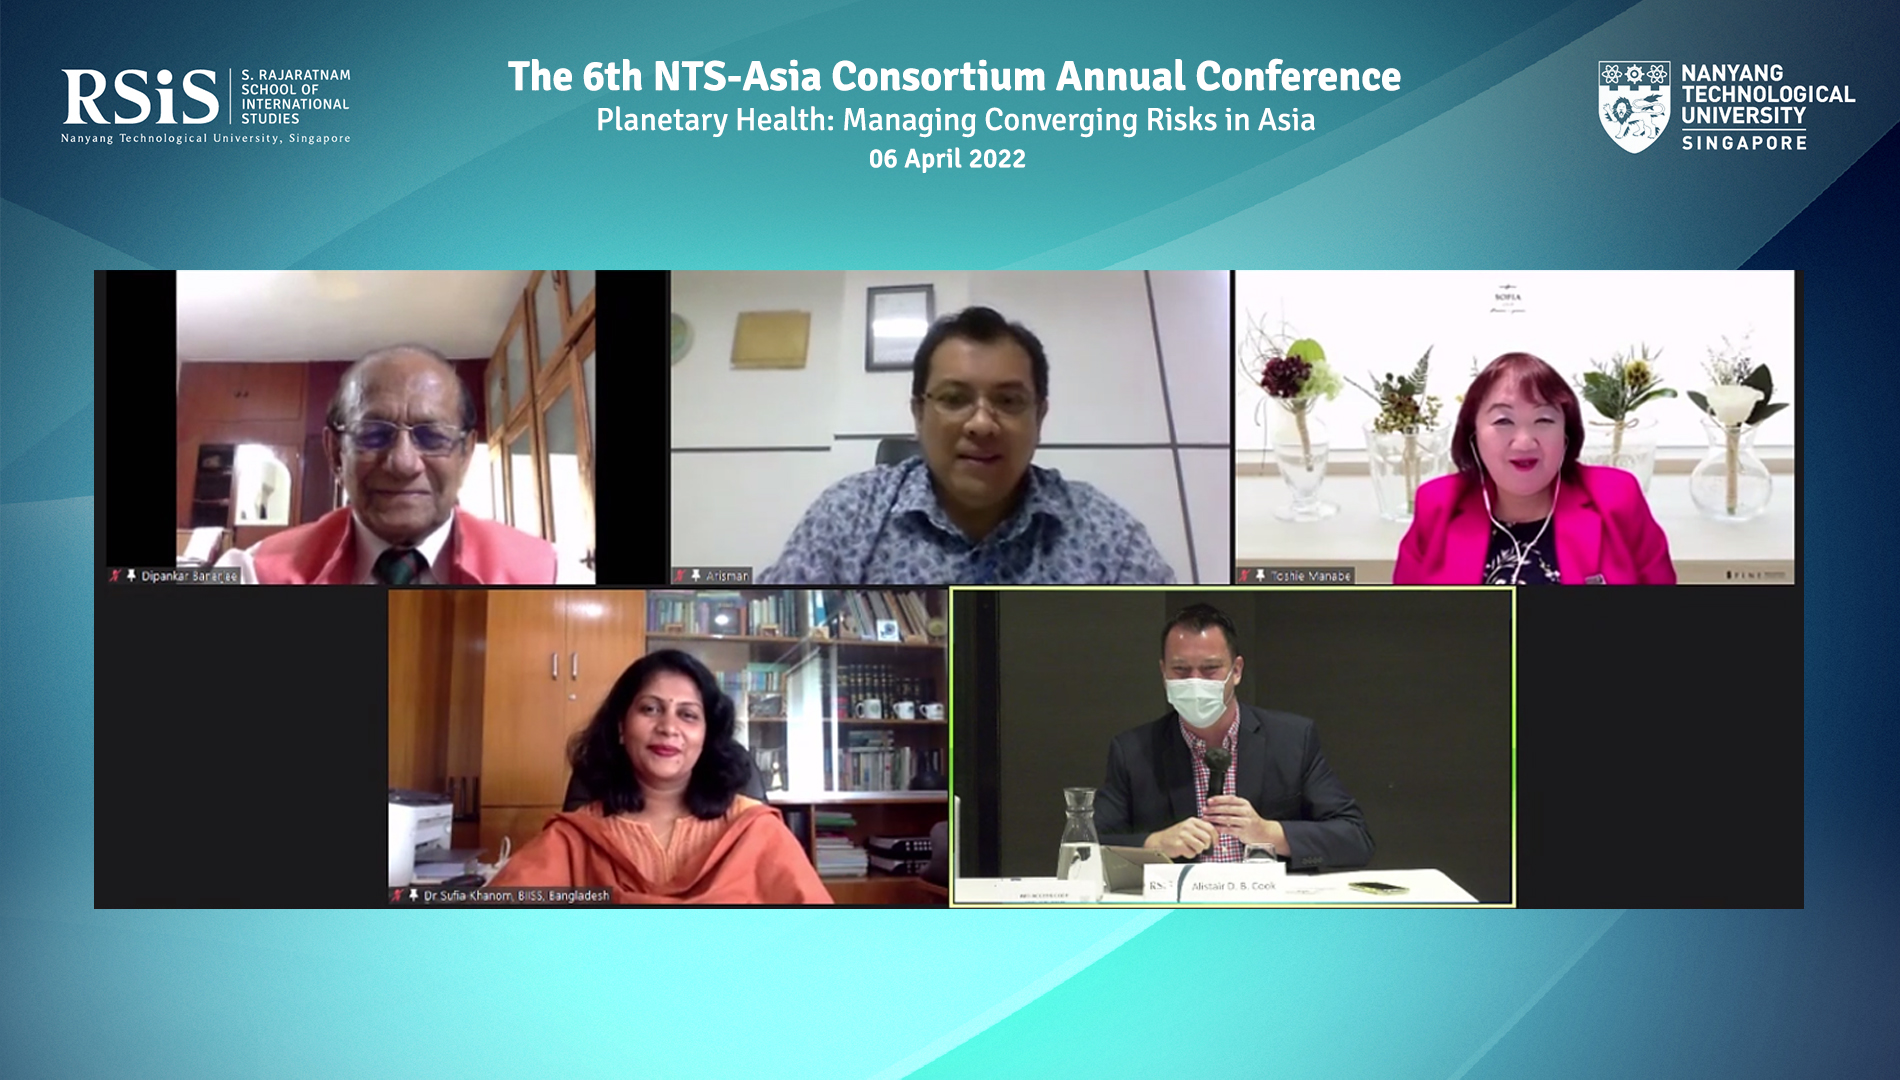 Session 1 of the 6th NTS-Asia Consortium Conference discusses about what planetary health could possibly mean from the Asian lens.